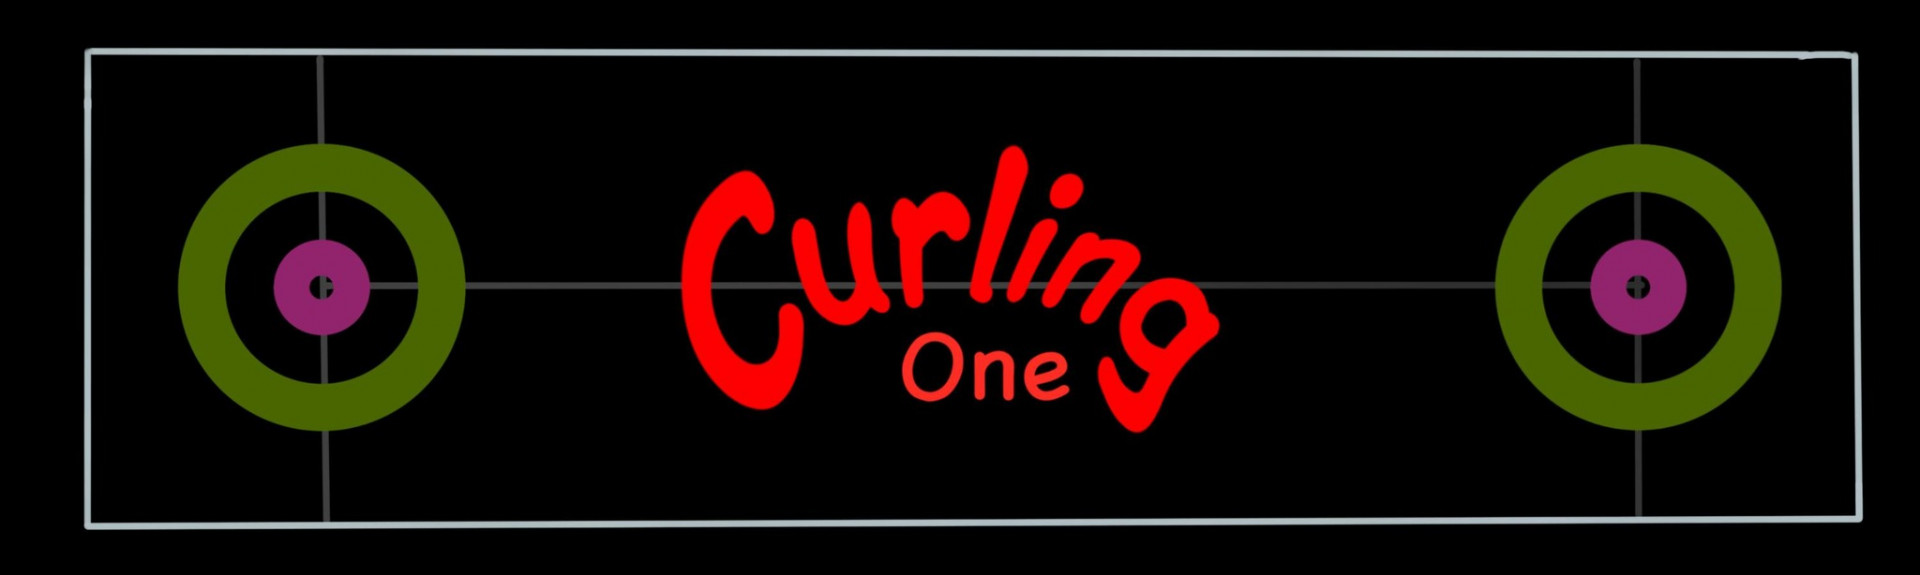 Curling One